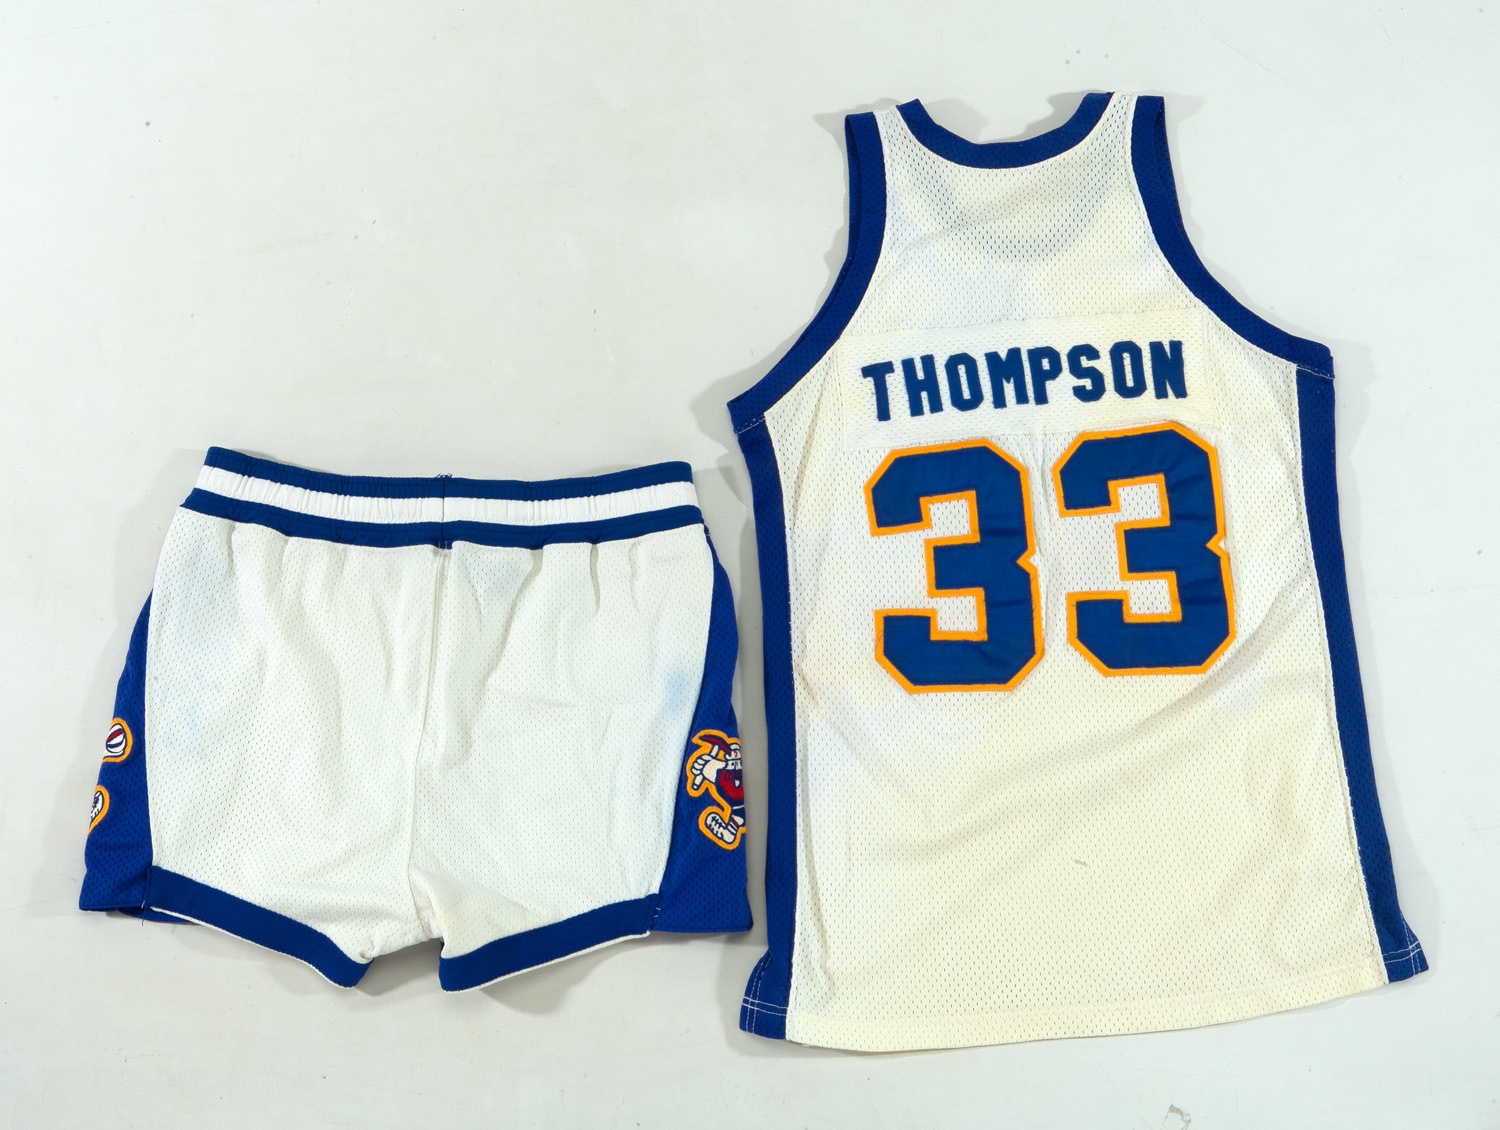 abamx Store Introducing The ABA Legends: David Thompson #33 Retro Denver Nuggets Jersey! 3XL